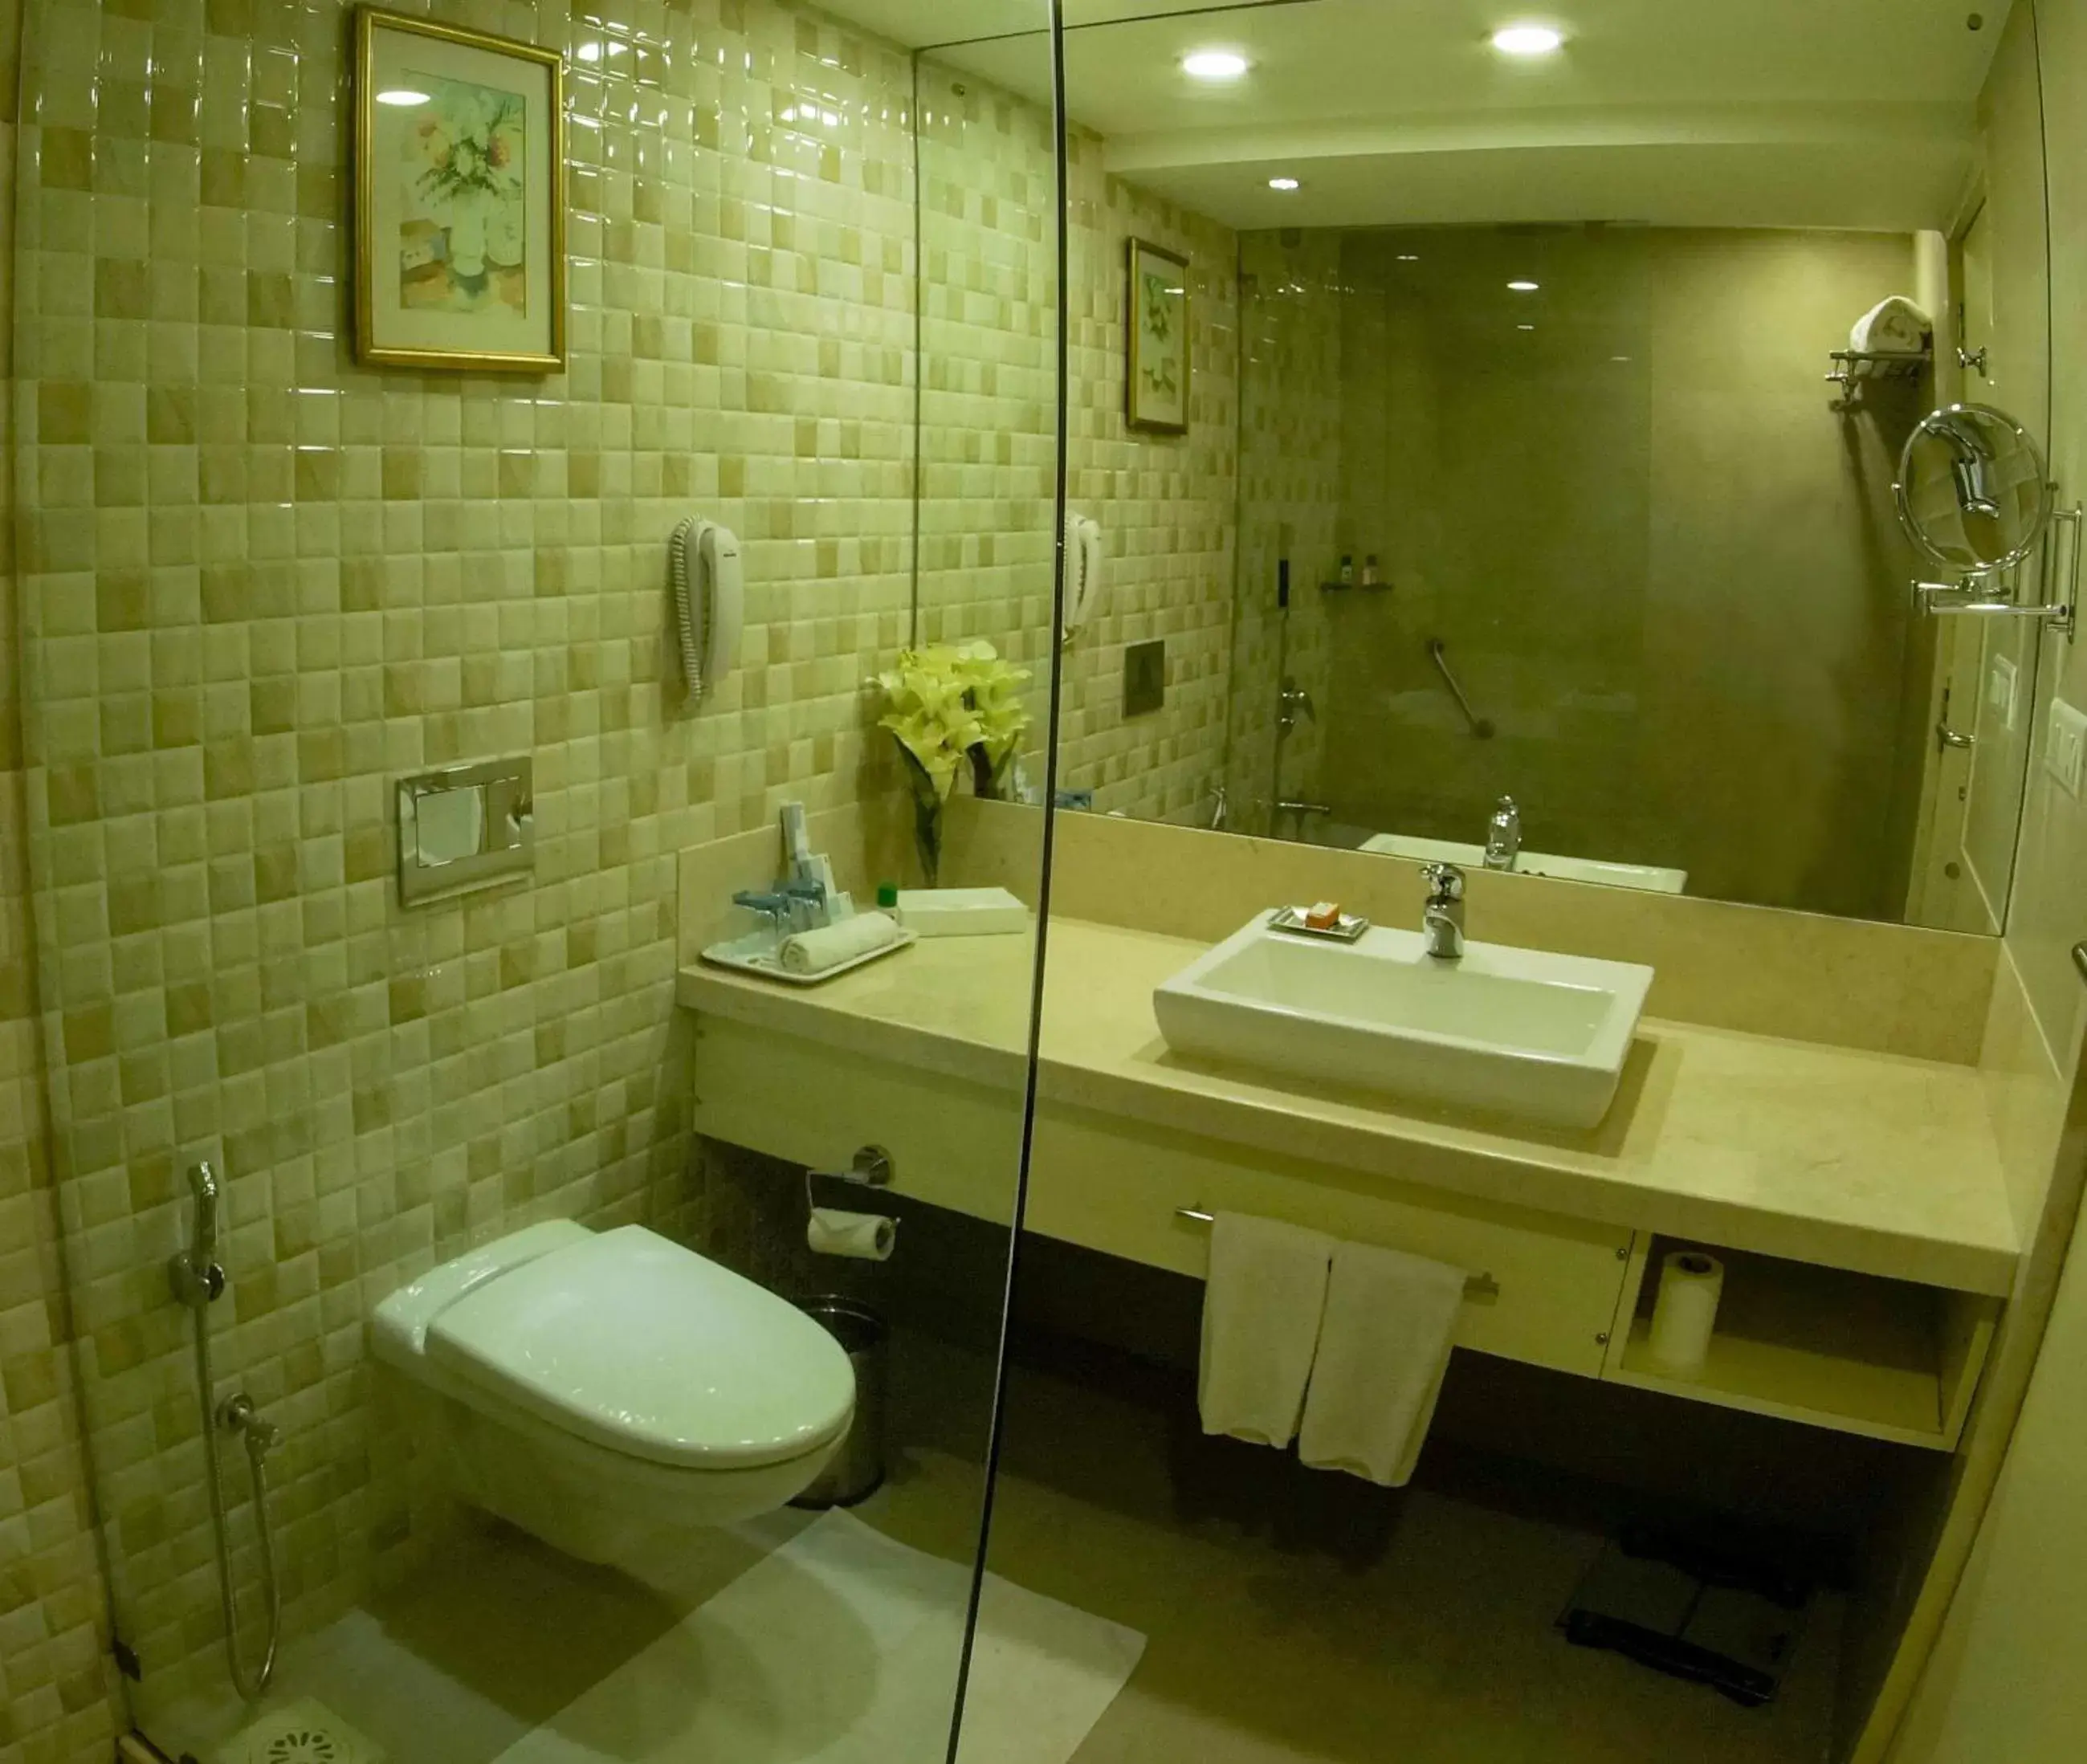 Bathroom in Fortune Park Galaxy, Vapi - Member ITC's Hotel Group